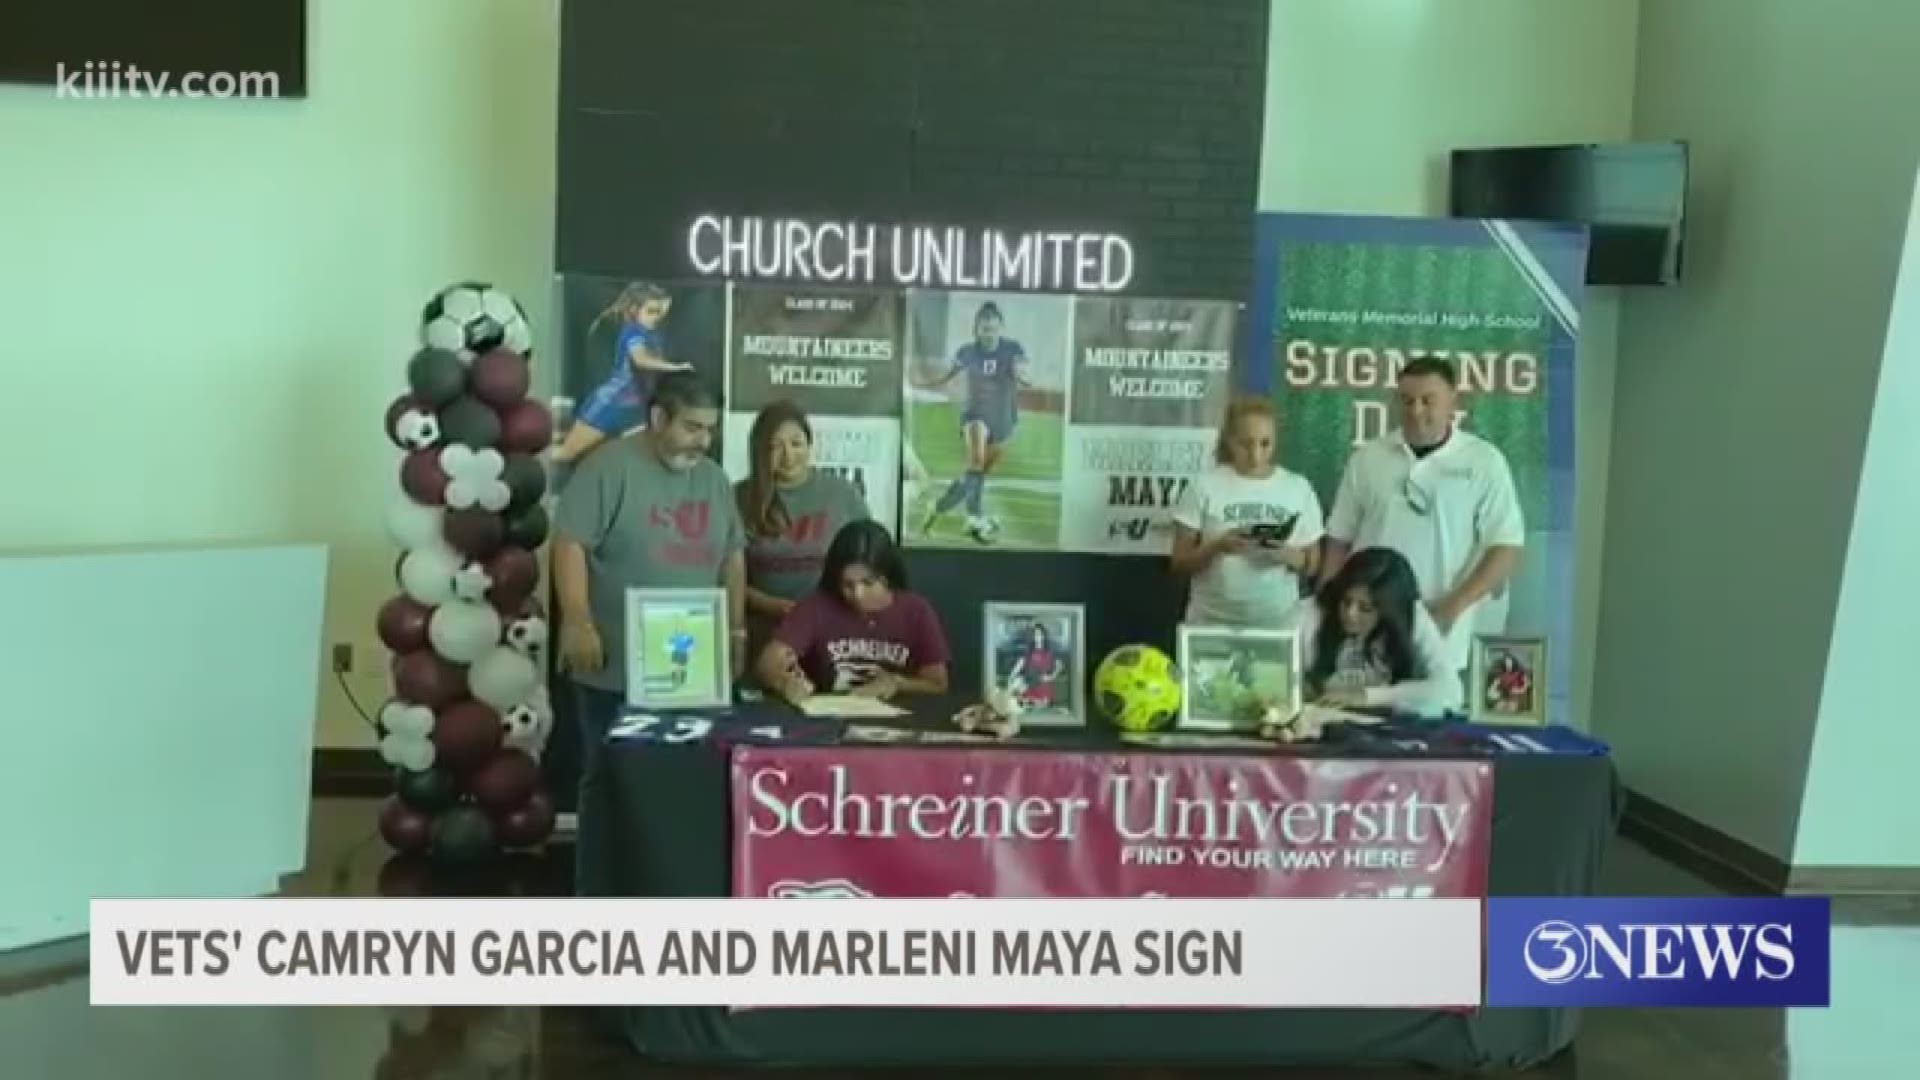 Eagles soccer players Camryn Garcia and Marleni Maya both signed with Schreiner University.